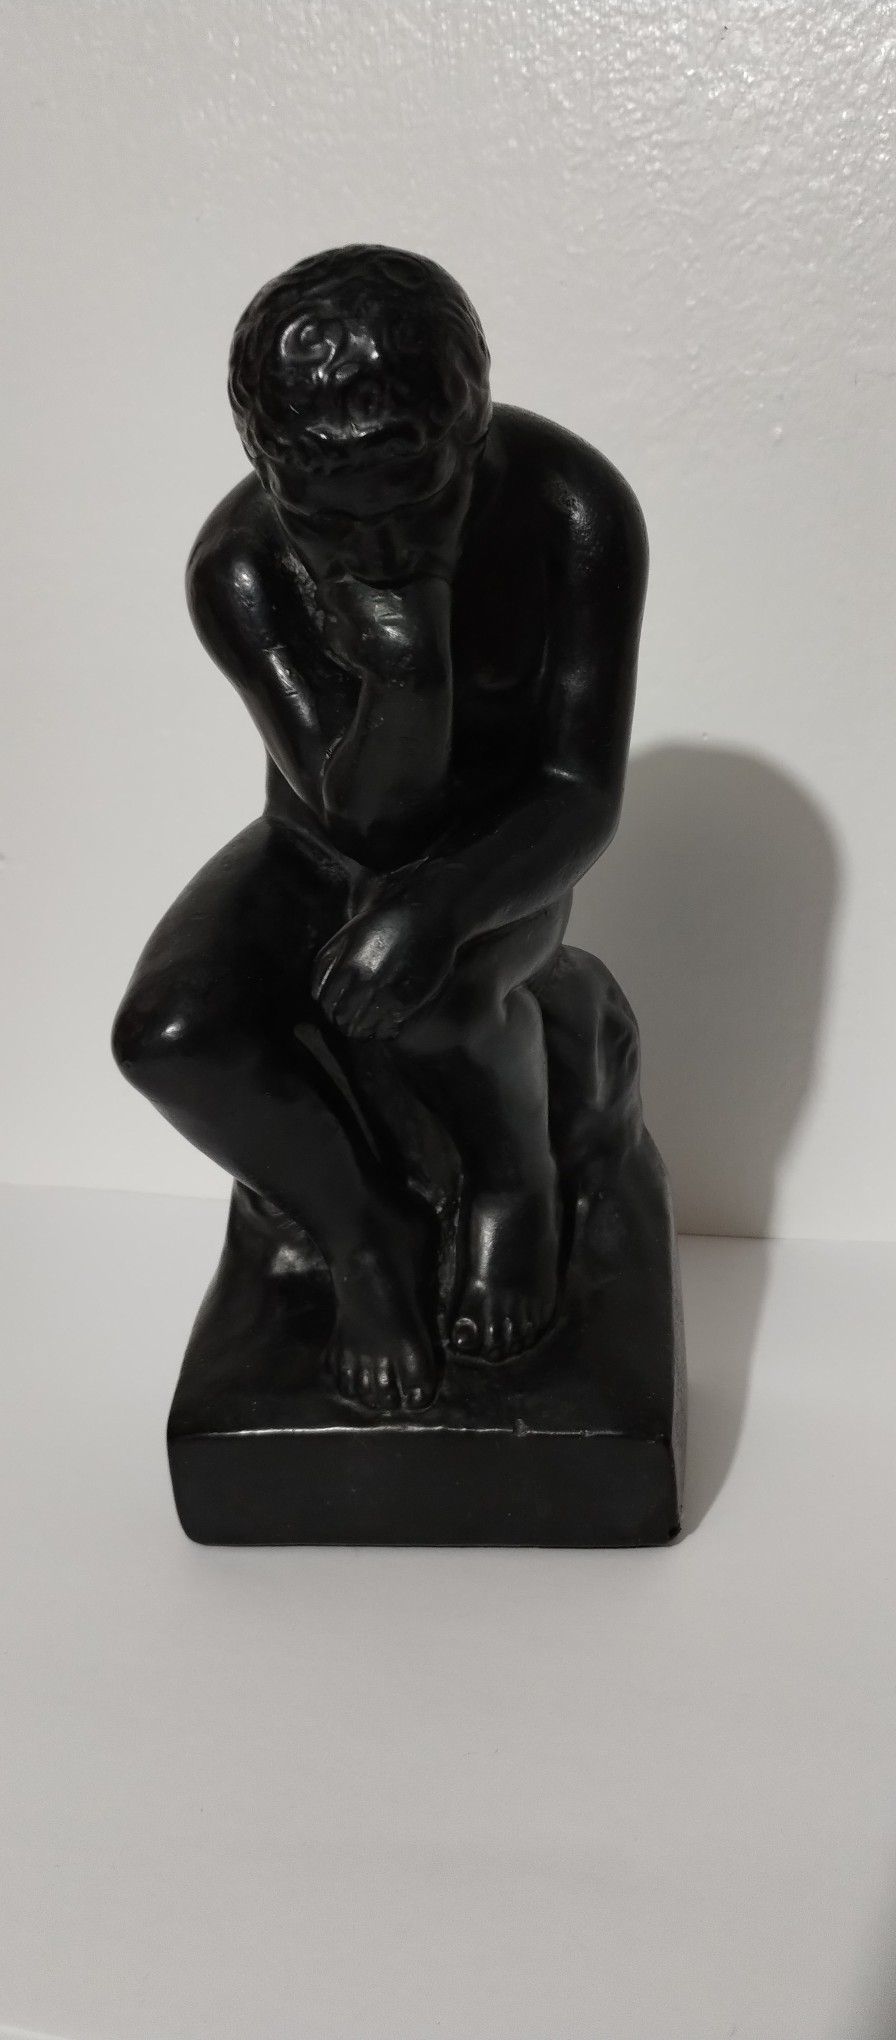 THE THINKER STATUE 9"×4"×4"